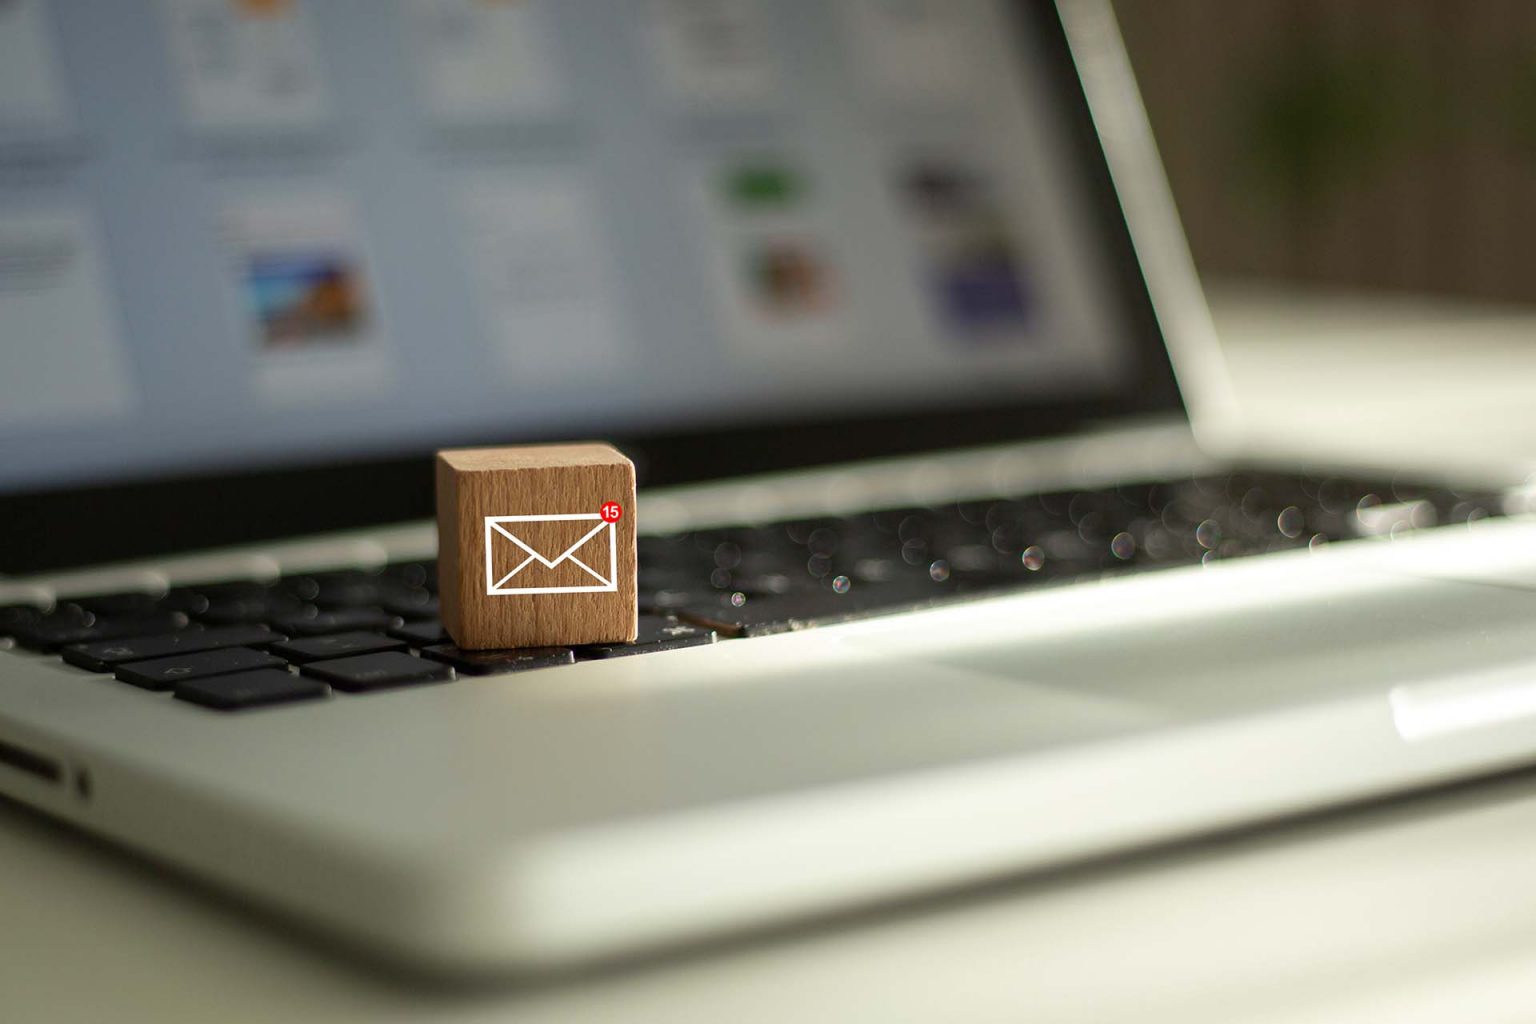 Wooden block sitting on the keyboard of a grey laptop. On the front of the wooden block is an icon of an envelope with the number 15 in a small red circle on the top left. This icon represents a new email.